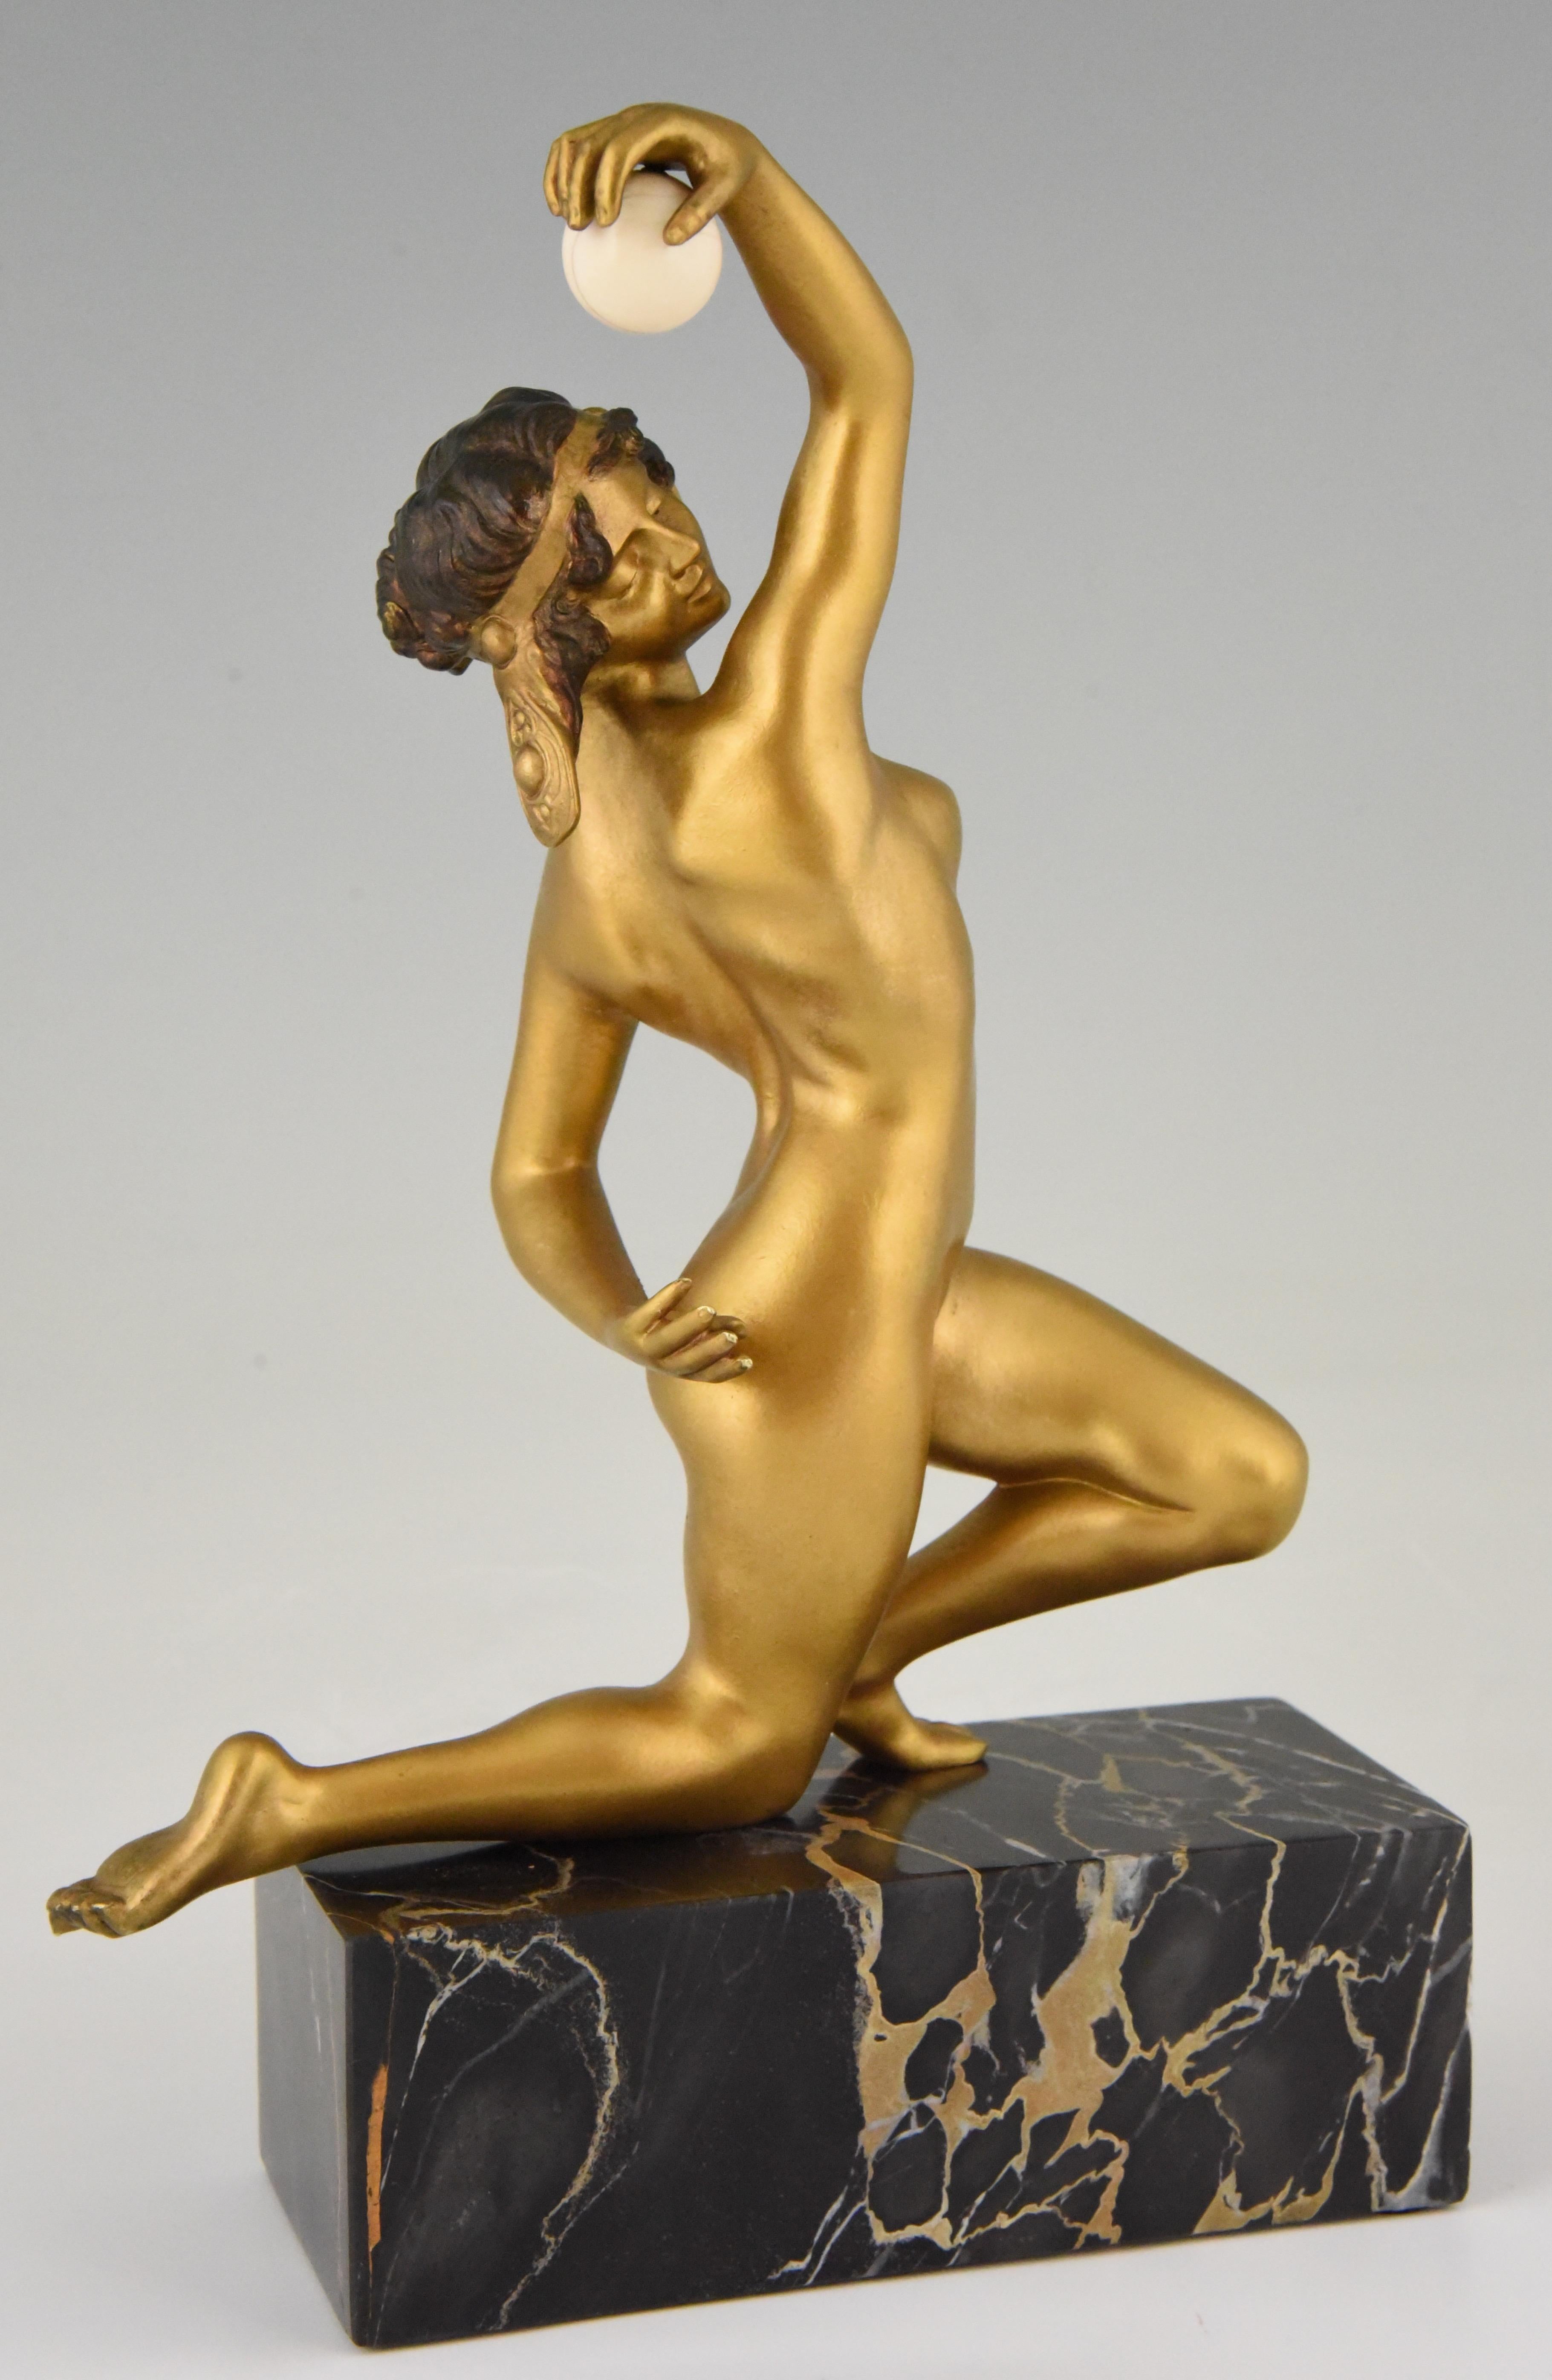 Art Deco bronze sculpture of a kneeling nude juggling with a ball. The bronze has a golden patina and is signed by the French/Italian artist Affortunato Gory. 
This bronze is illustrated on page 1152 of ? “Bronzes, sculptors and founders” by H.